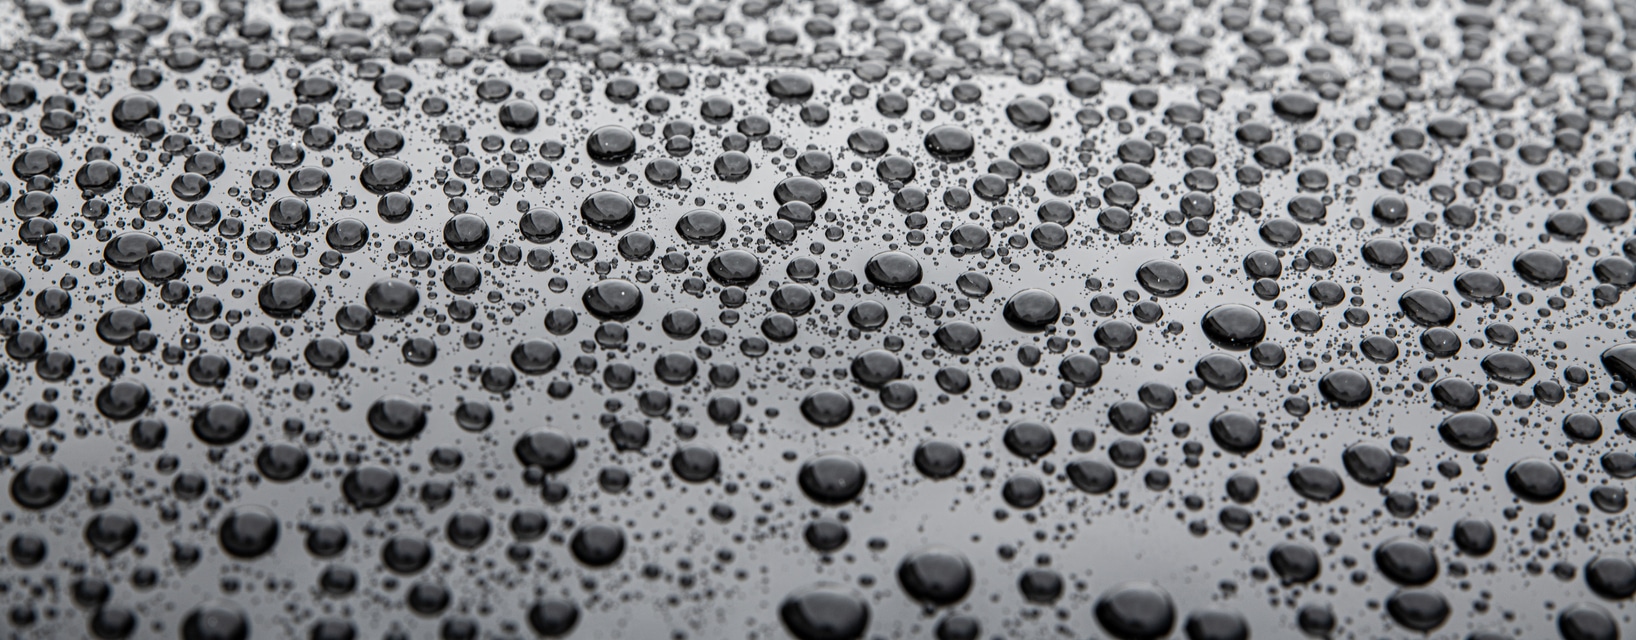 Water drops on car paint. Hydrophobic water effect on car body